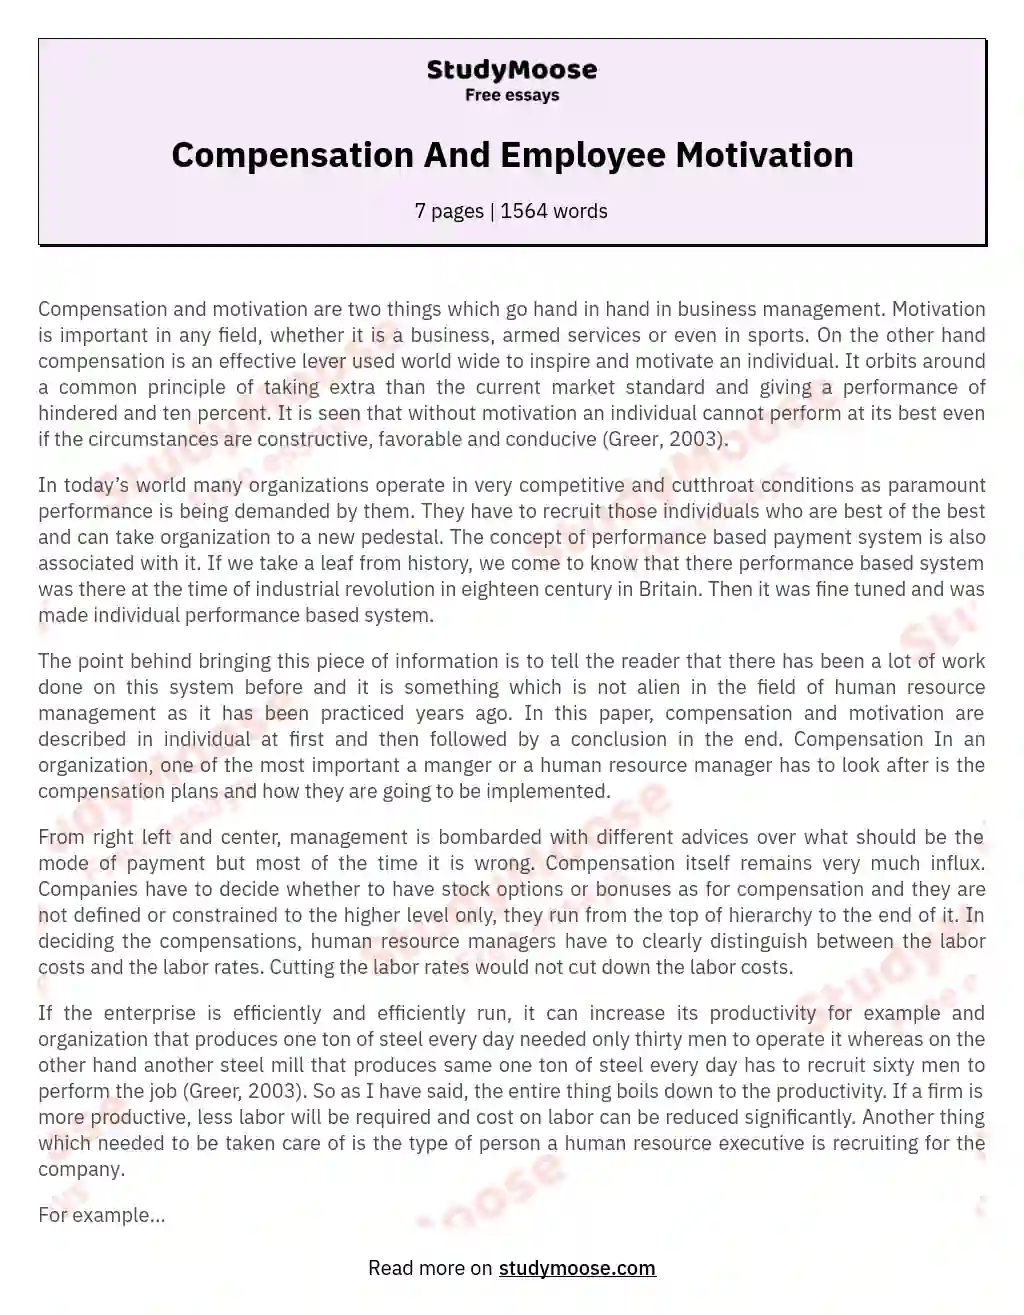 Compensation And Employee Motivation essay